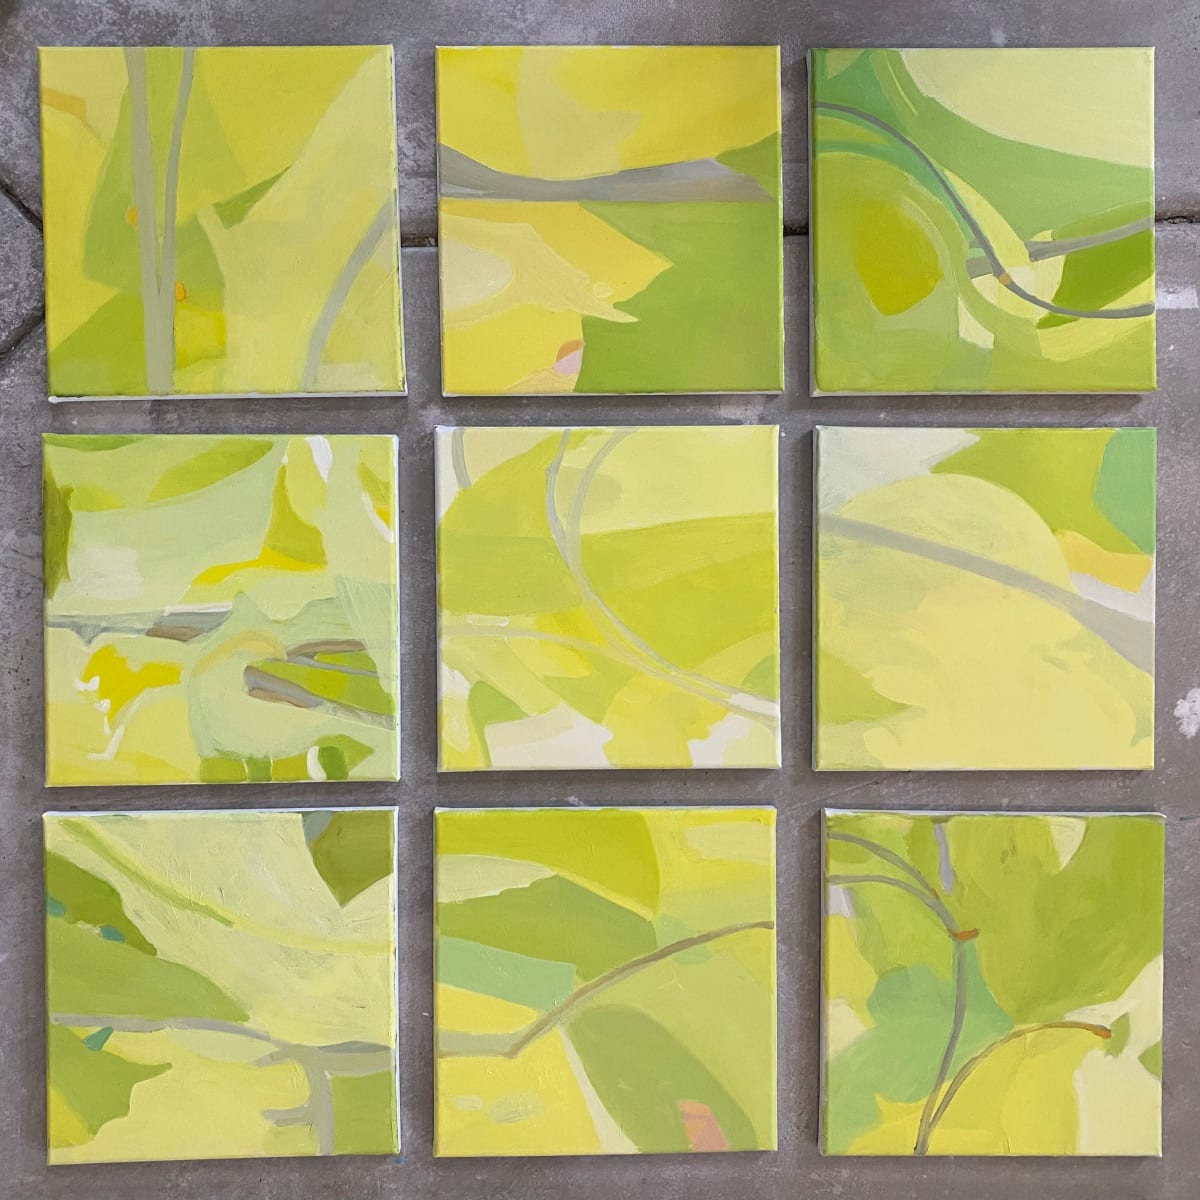 Maple Shapes Mural by Monica E Carroll  Image: Series of 12 x 12 oil on canvas